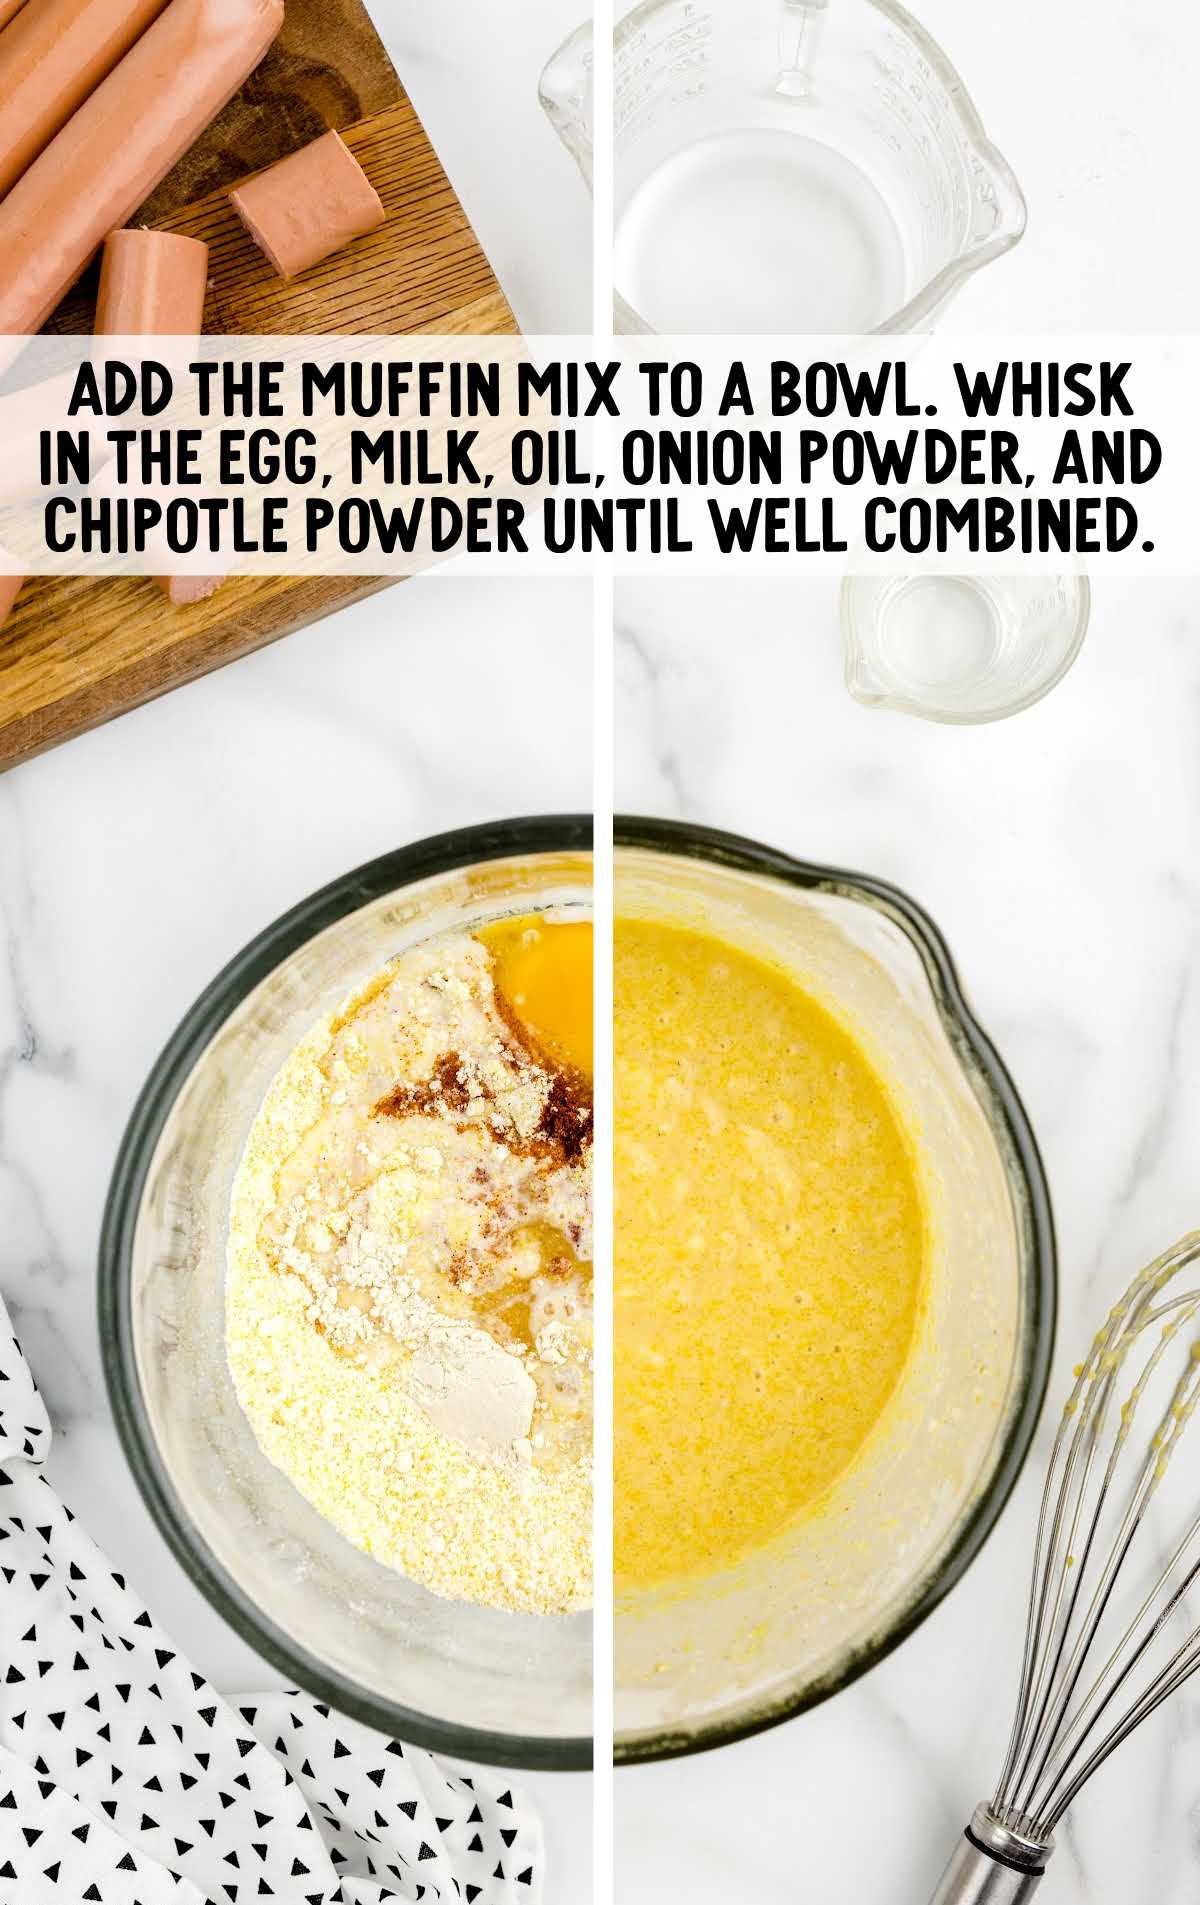 egg, milk, vegetable oil, onion powder, and chipotle powder whisked into the corn muffin mix